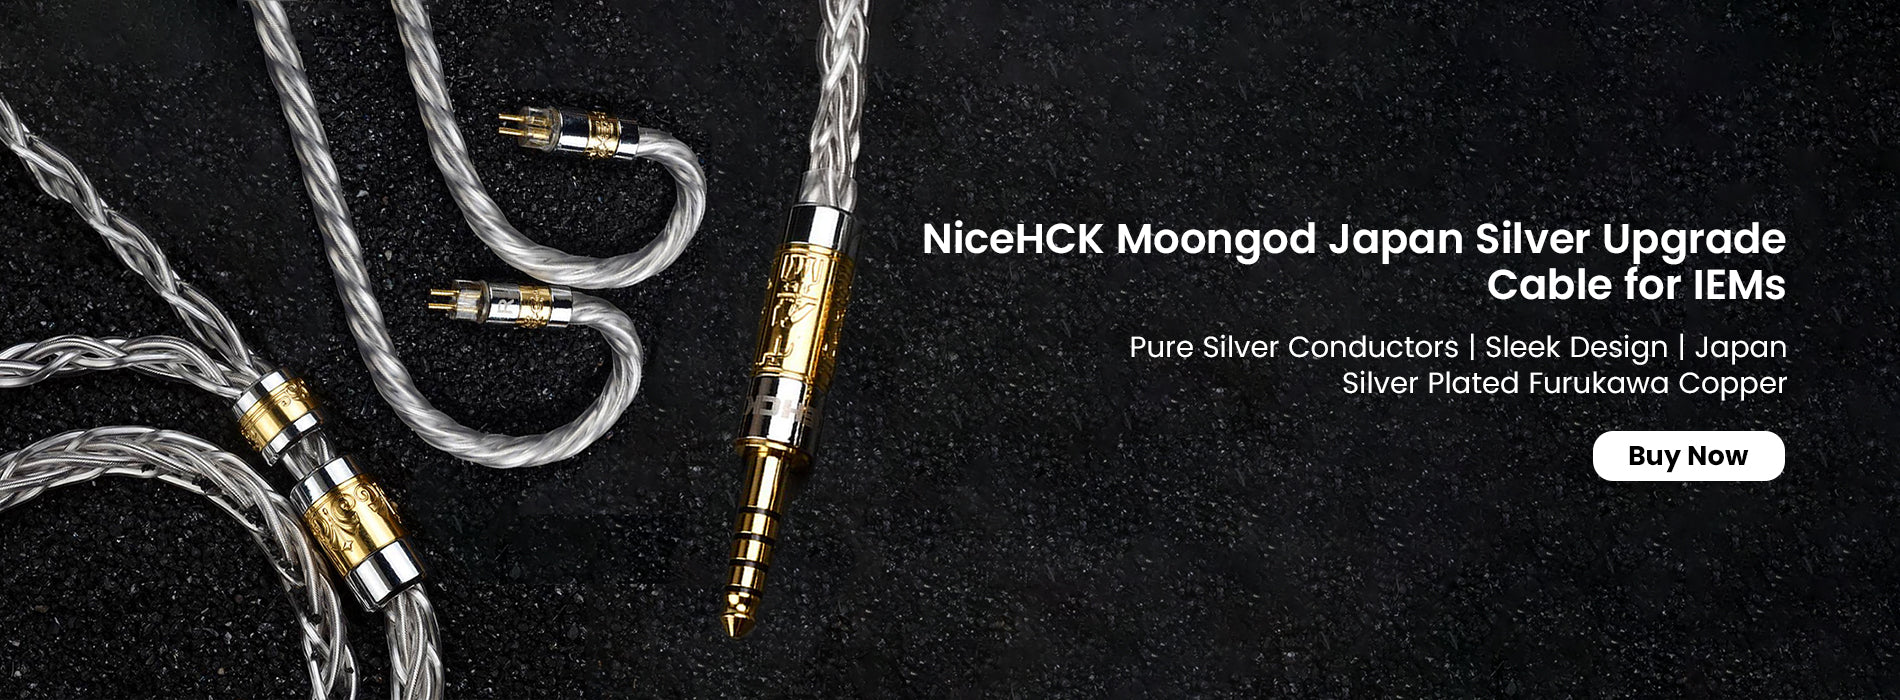 NiceHCK Moongod Japan Silver Upgrade Cable for IEMs